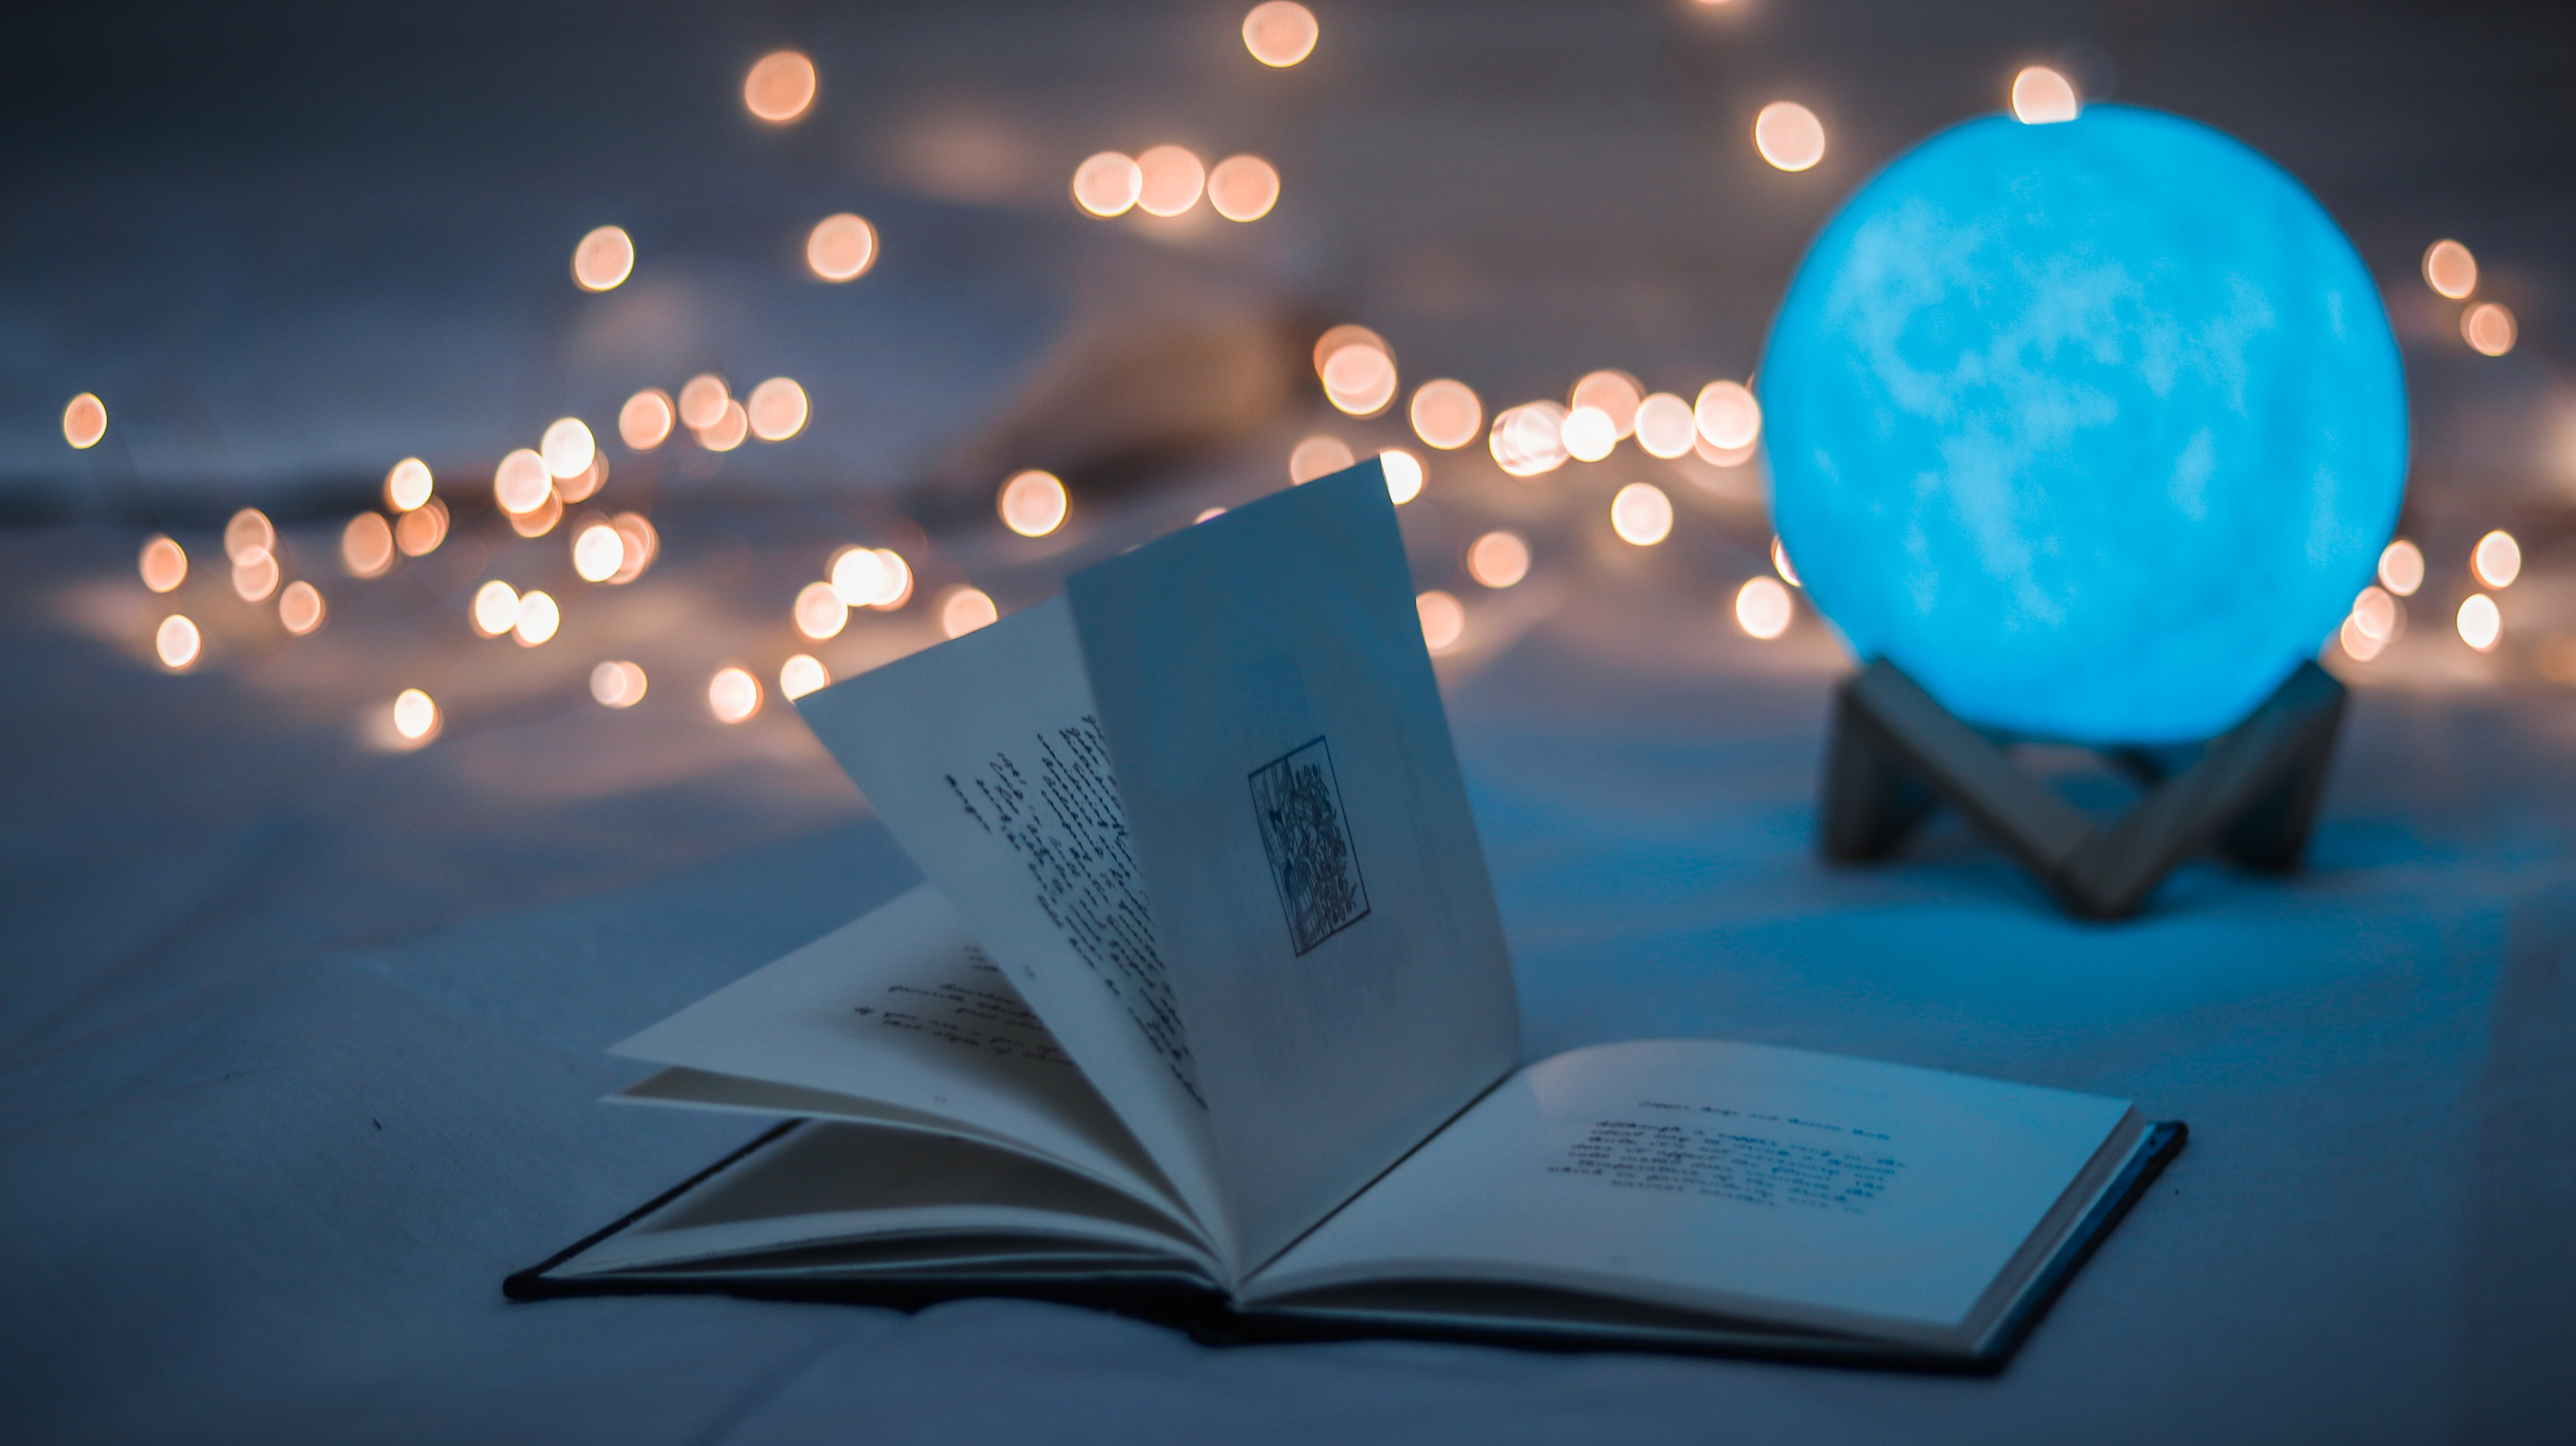 An open book and a blue crystal globe